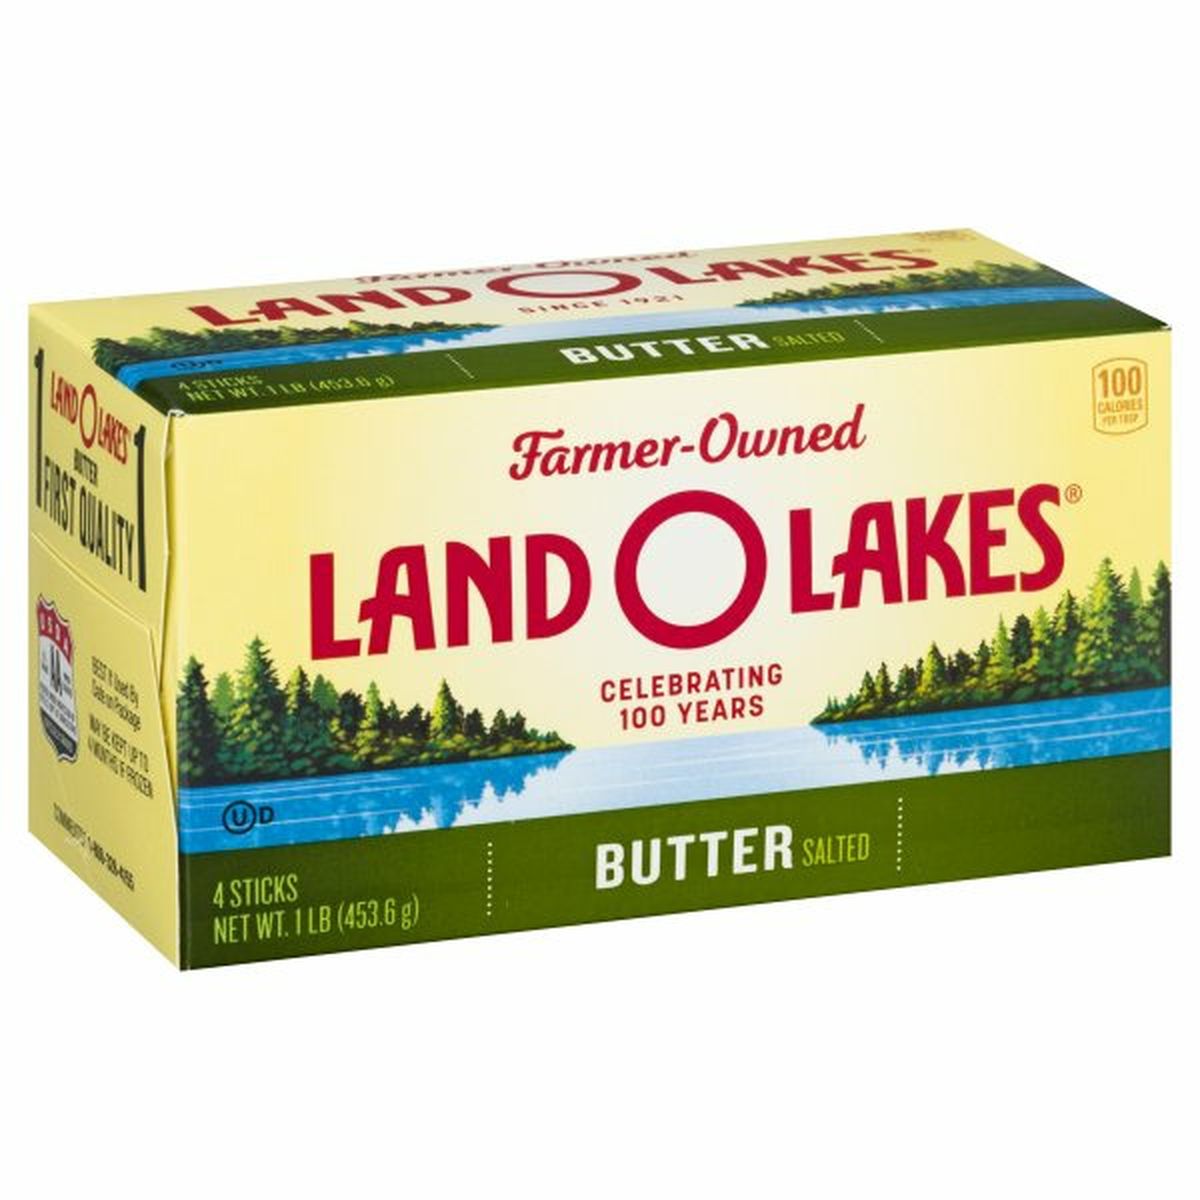 Calories in Land O Lakes Butter, Salted